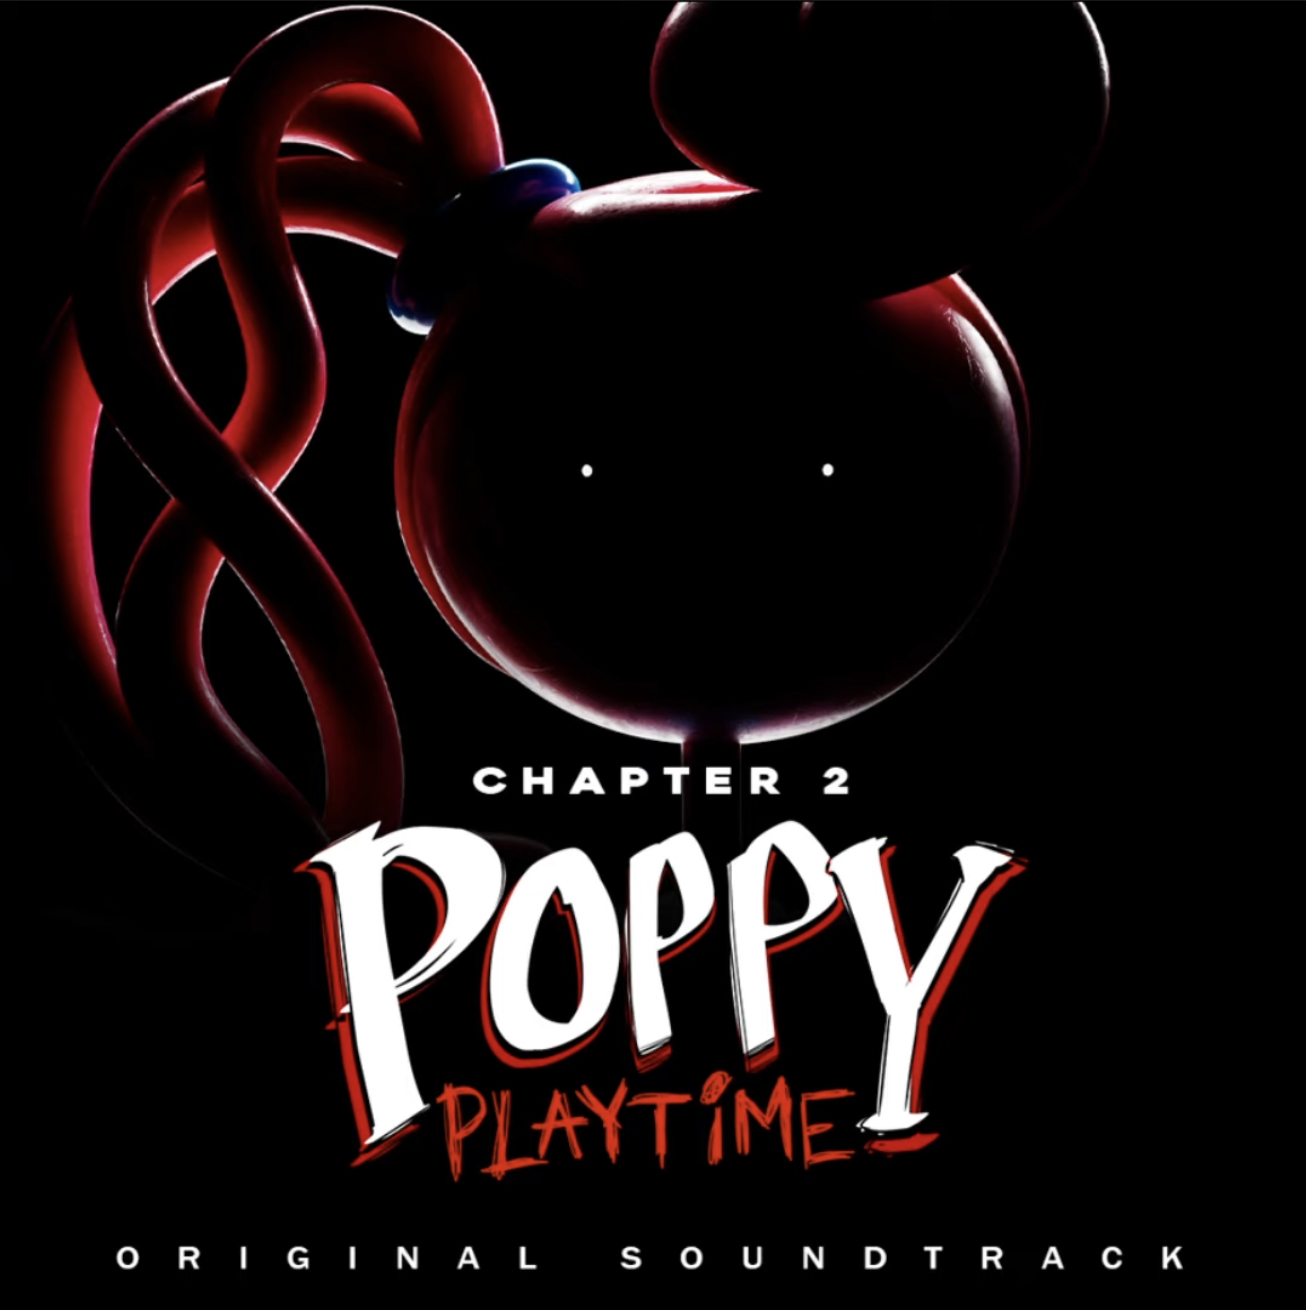 Poppy Playtime Chapter 2 on the App Store